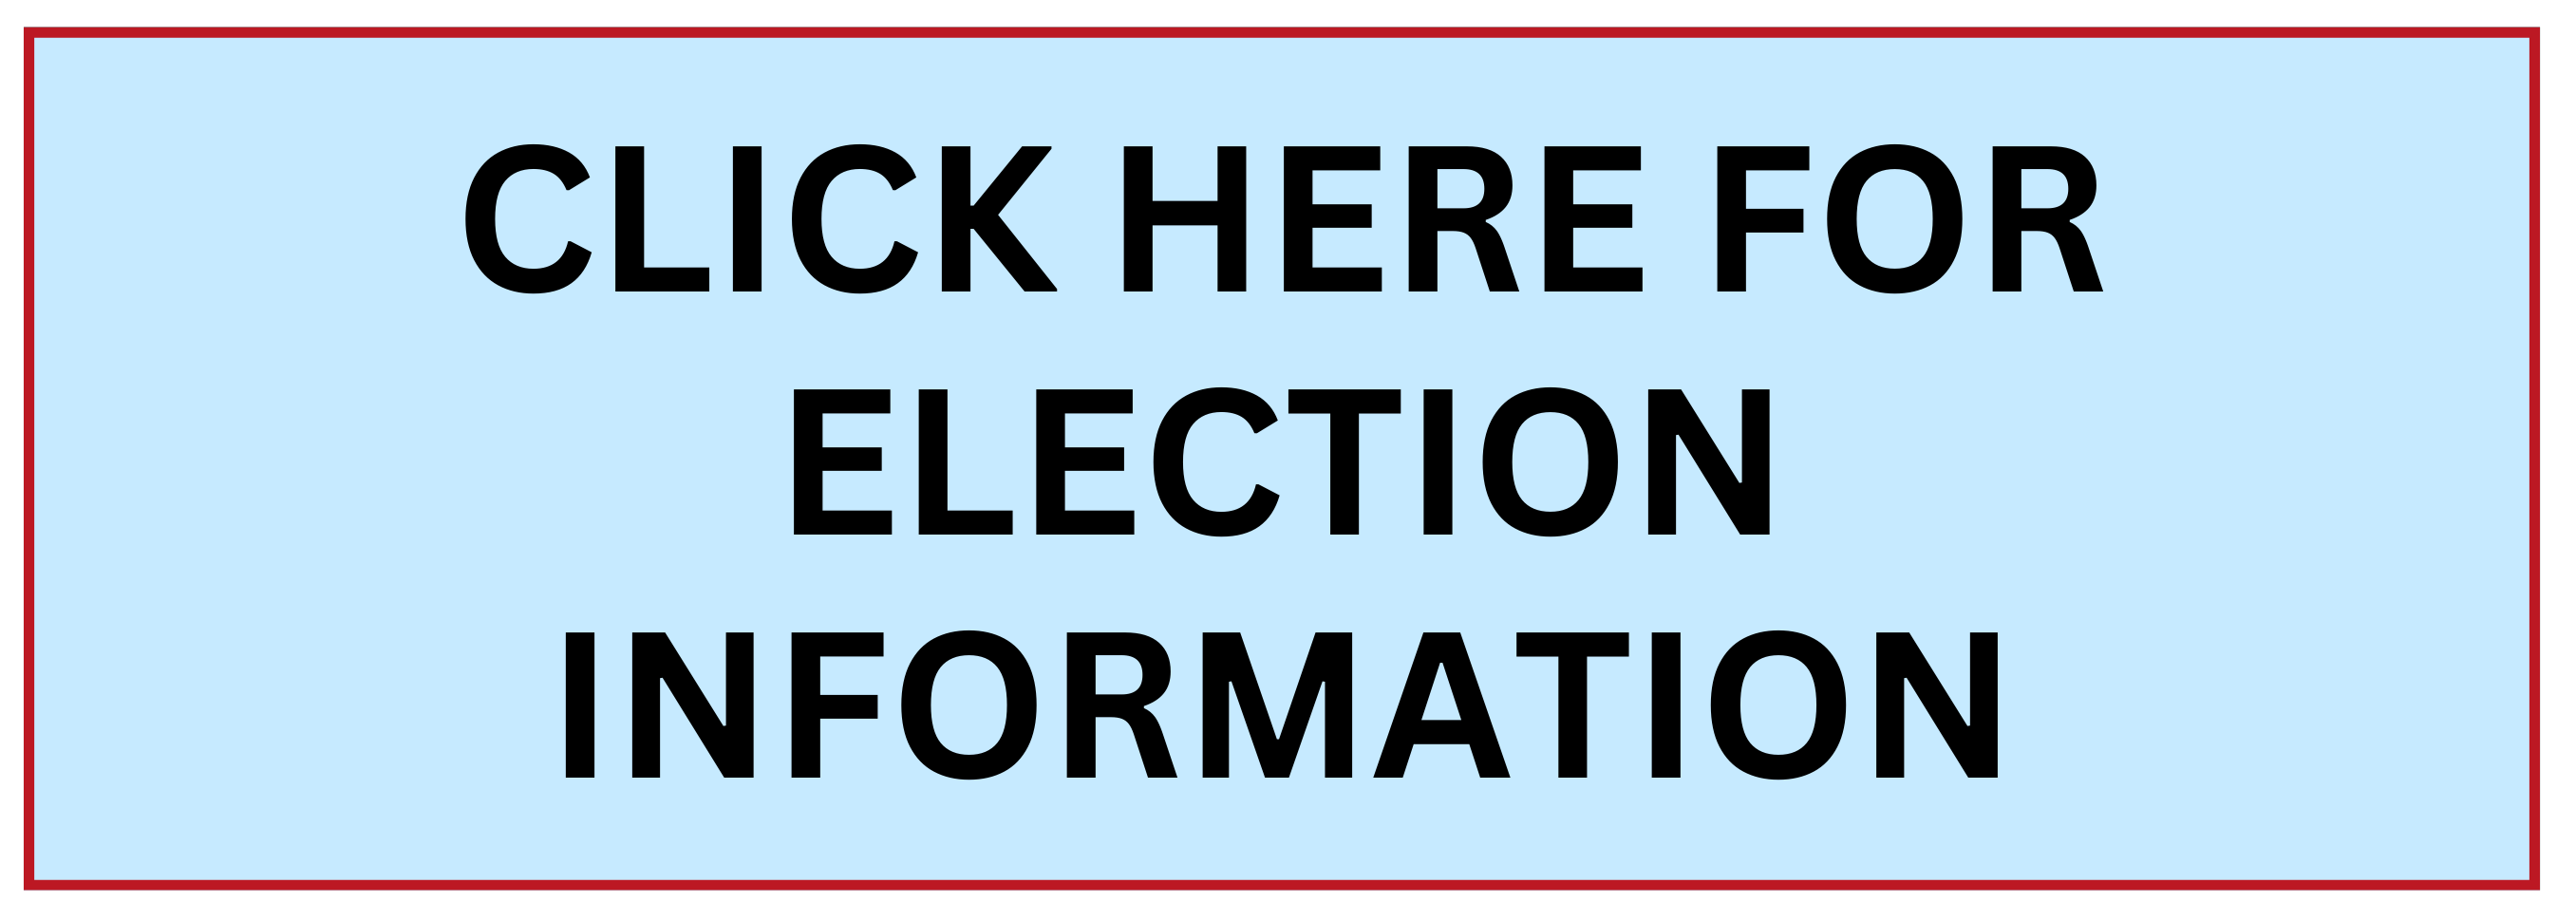 click here for election information